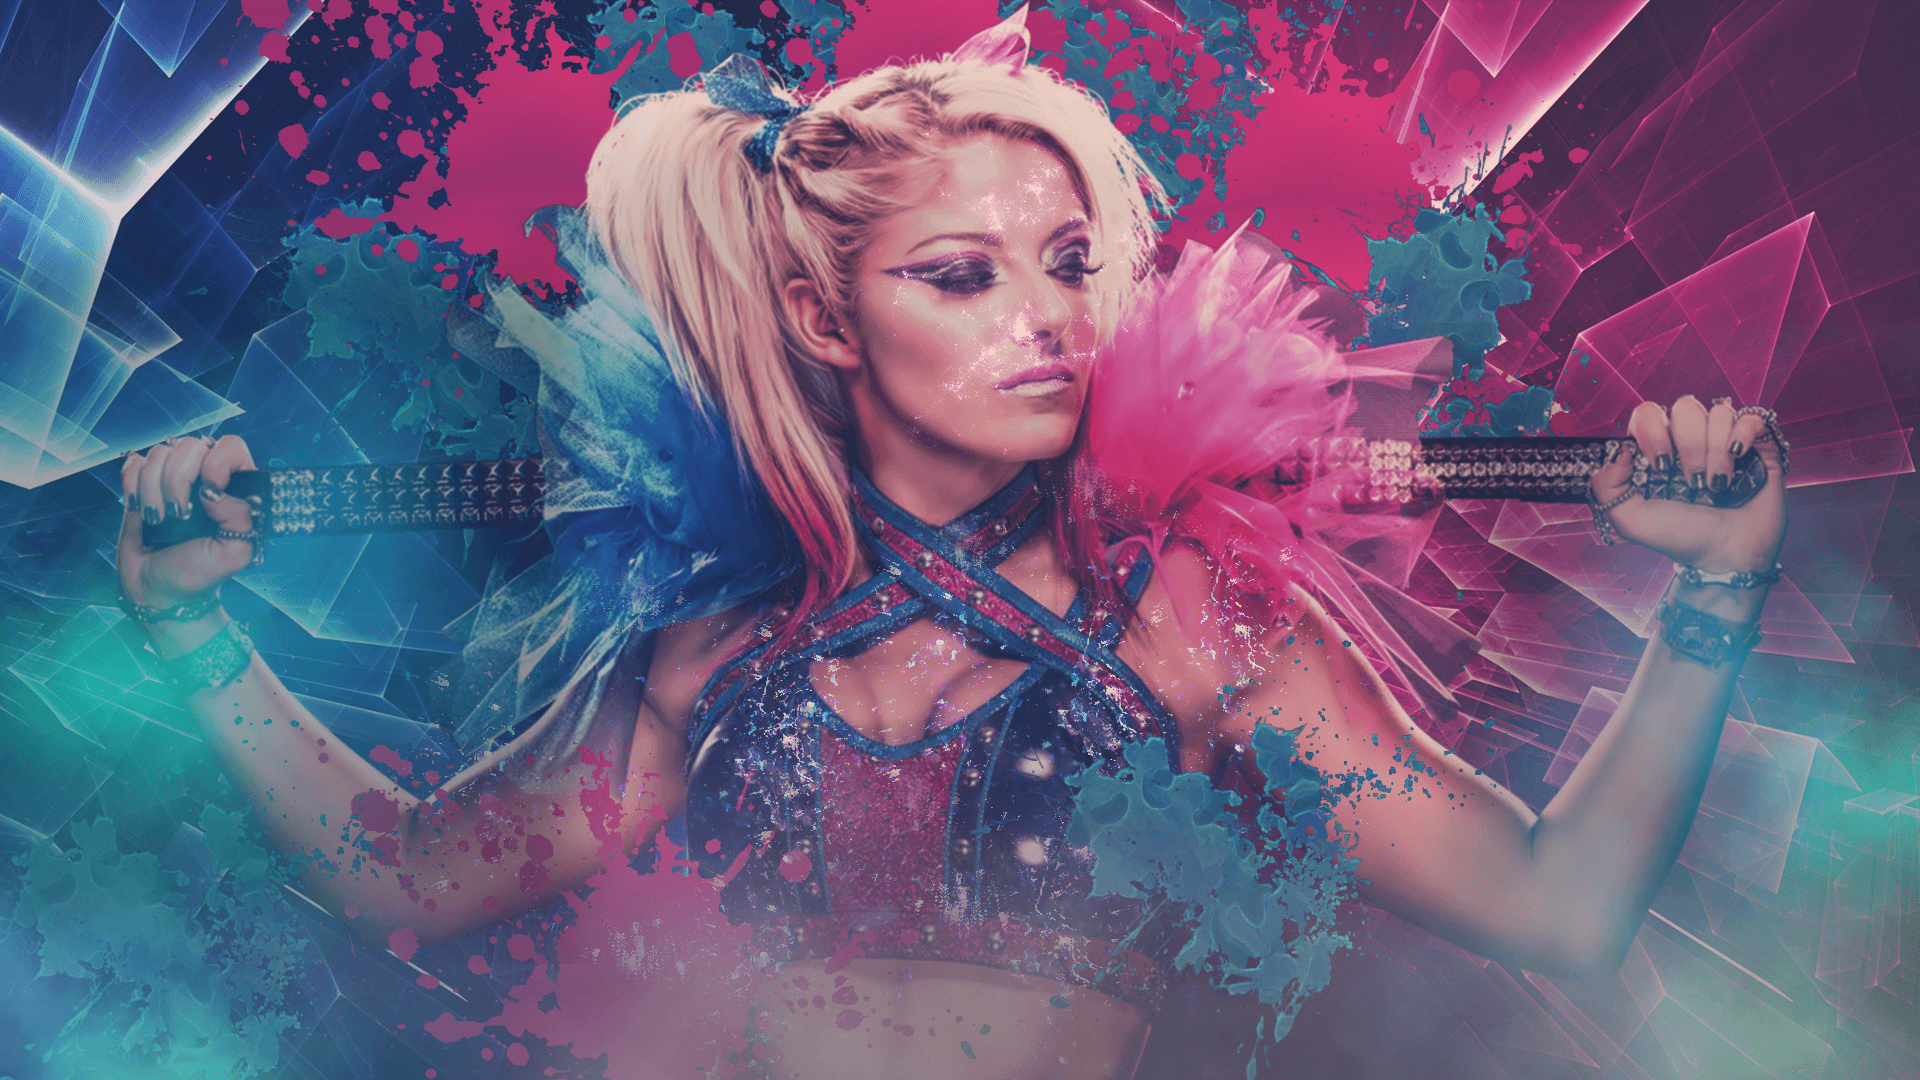 Alexa Bliss Wallpaper, what do you think?